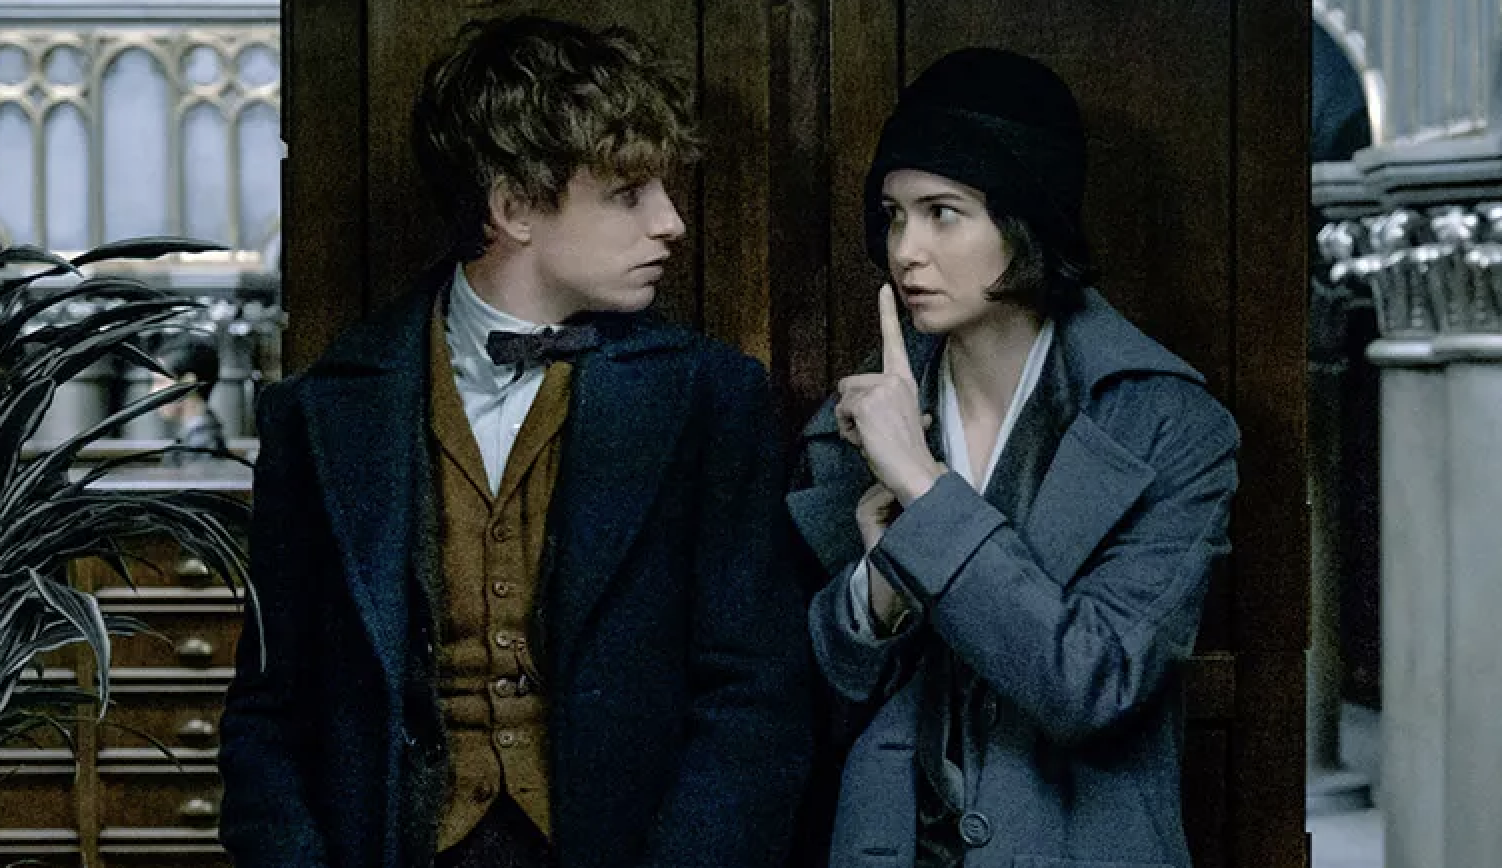 Two characters from &quot;Fantastic Beasts&quot; film series, Newt Scamander and Porpentina Goldstein, stand close in period attire, appearing in a discussion